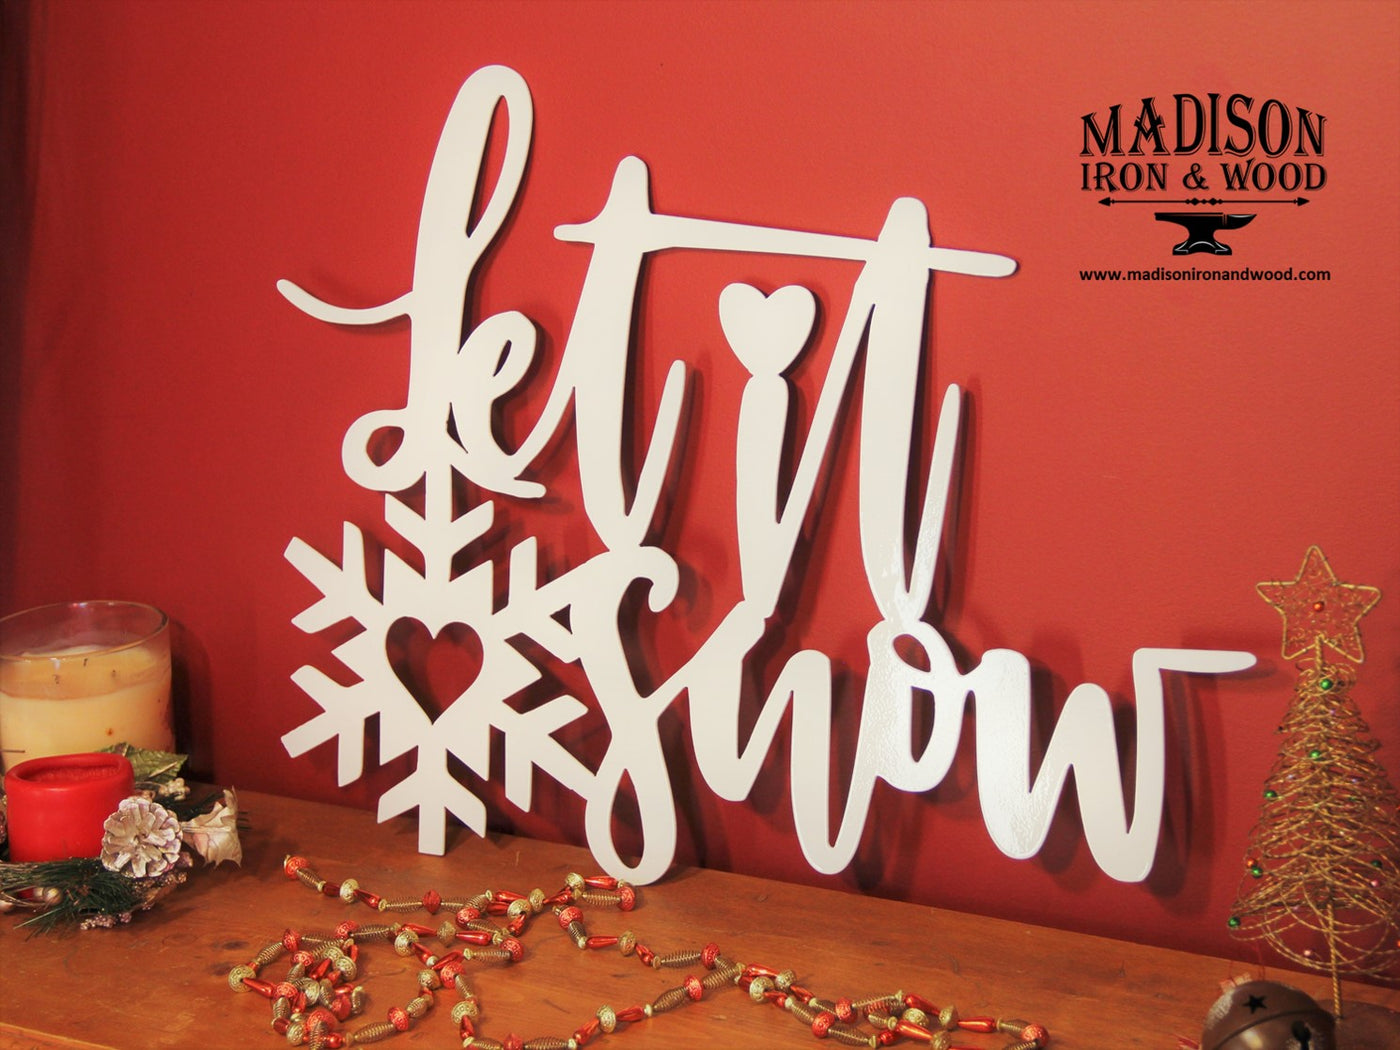 Let It Snow Metal Word Sign - Madison Iron and Wood - Wall Art - metal outdoor decor - Steel deocrations - american made products - veteran owned business products - fencing decorations - fencing supplies - custom wall decorations - personalized wall signs - steel - decorative post caps - steel post caps - metal post caps - brackets - structural brackets - home improvement - easter - easter decorations - easter gift - easter yard decor